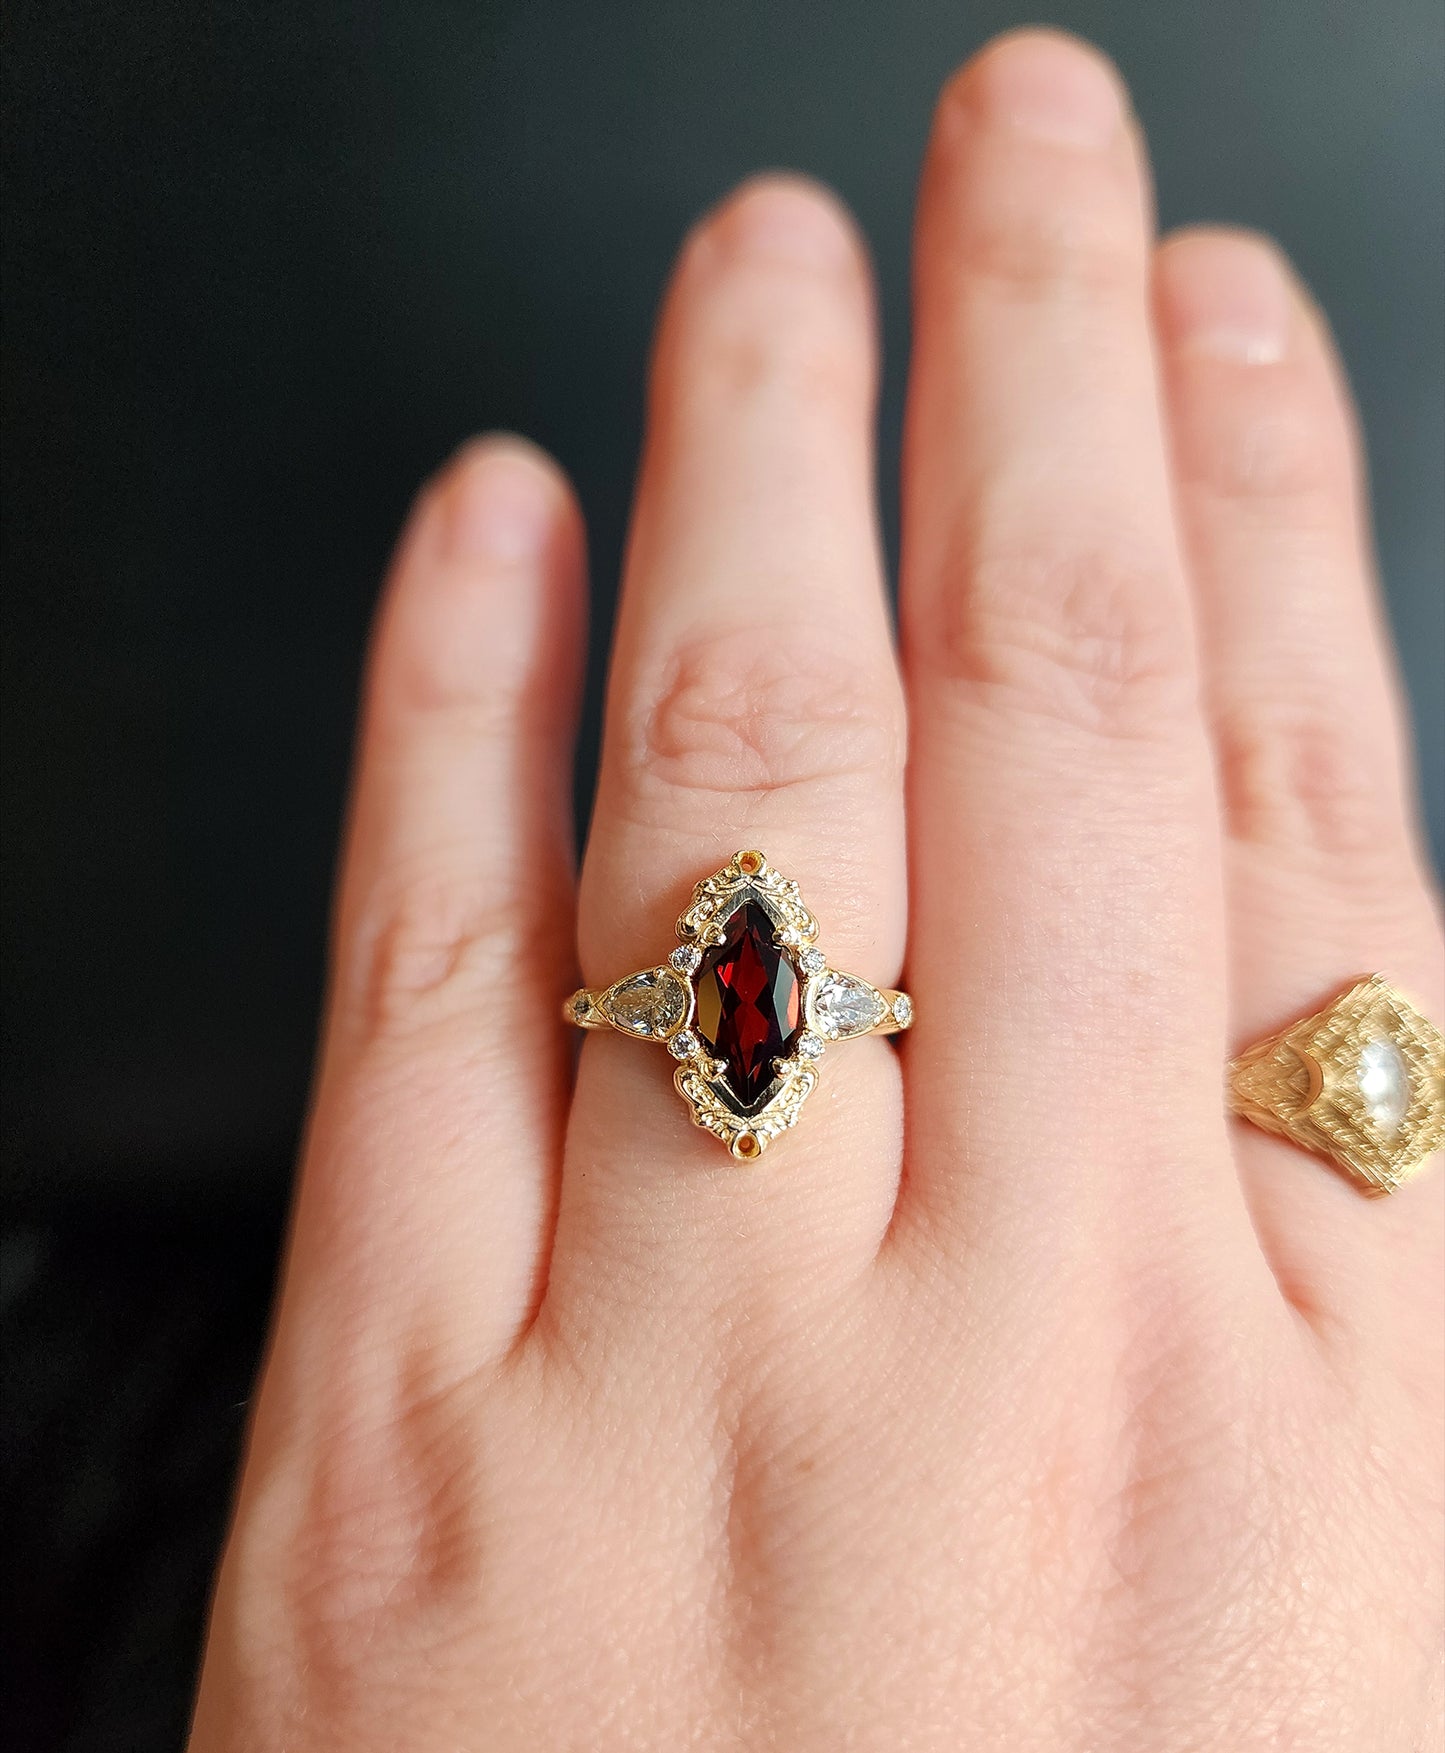 Red Garnet Odette antique styled engagement ring gold details gothic wedding ceremonial jewelry 